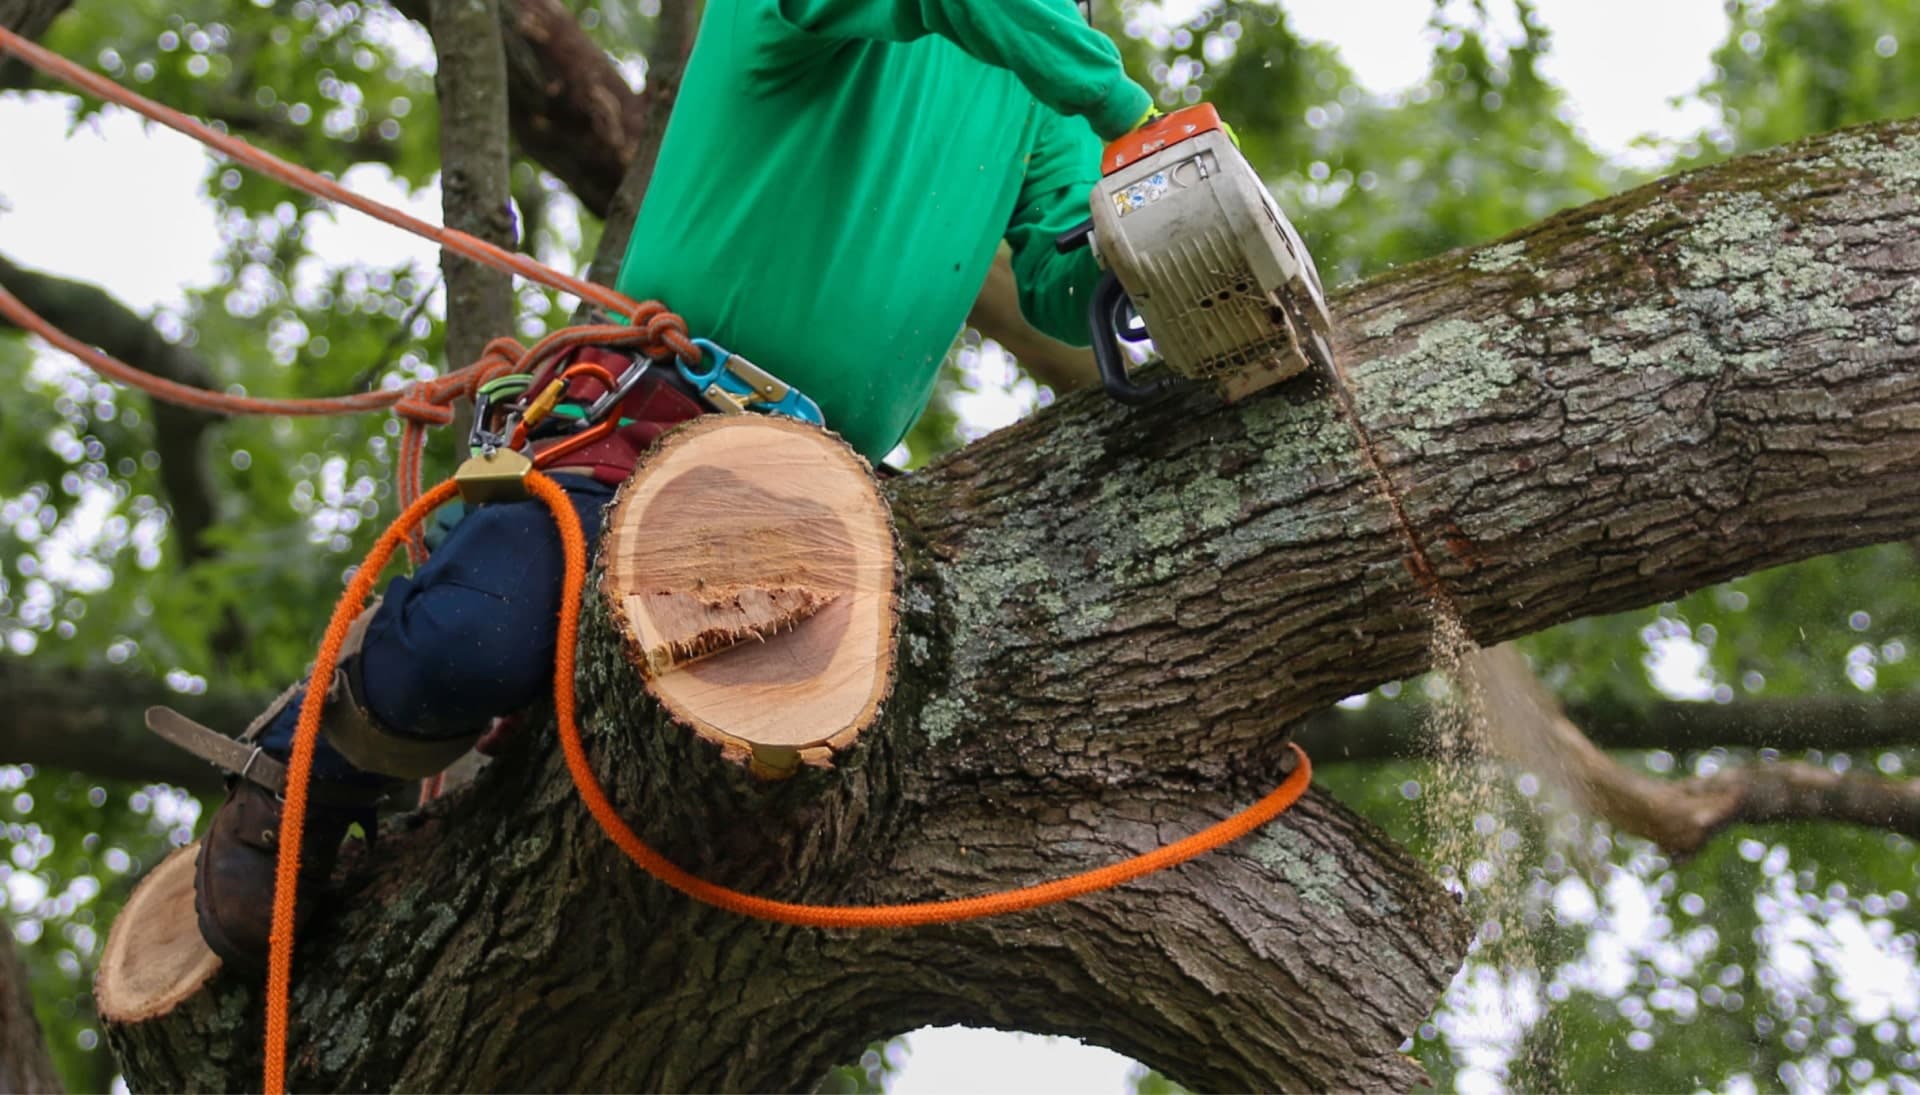 A tree removal expert uses a harness for safety while cutting a tree in a Brooklyn, NY yard.